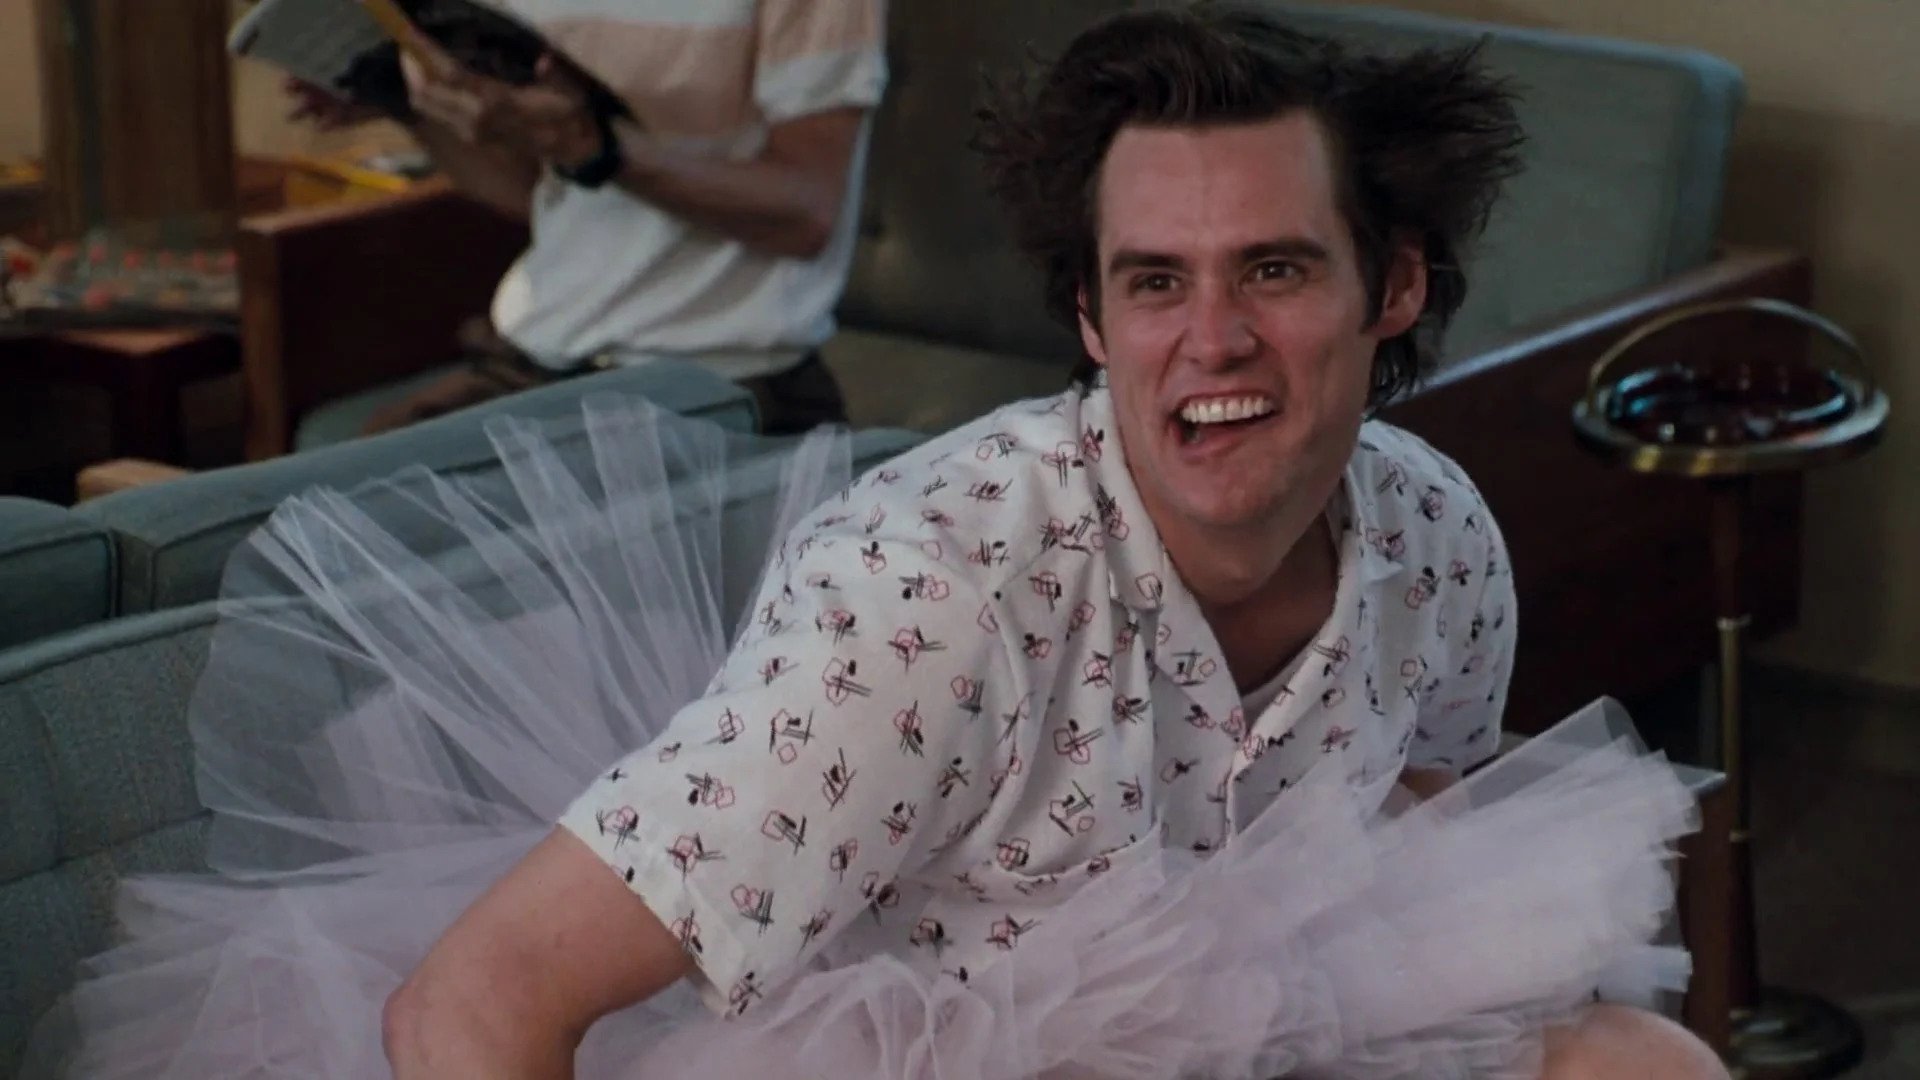 Ace Ventura wearing tutu costume and sitting on a sofa with a quirky face expression